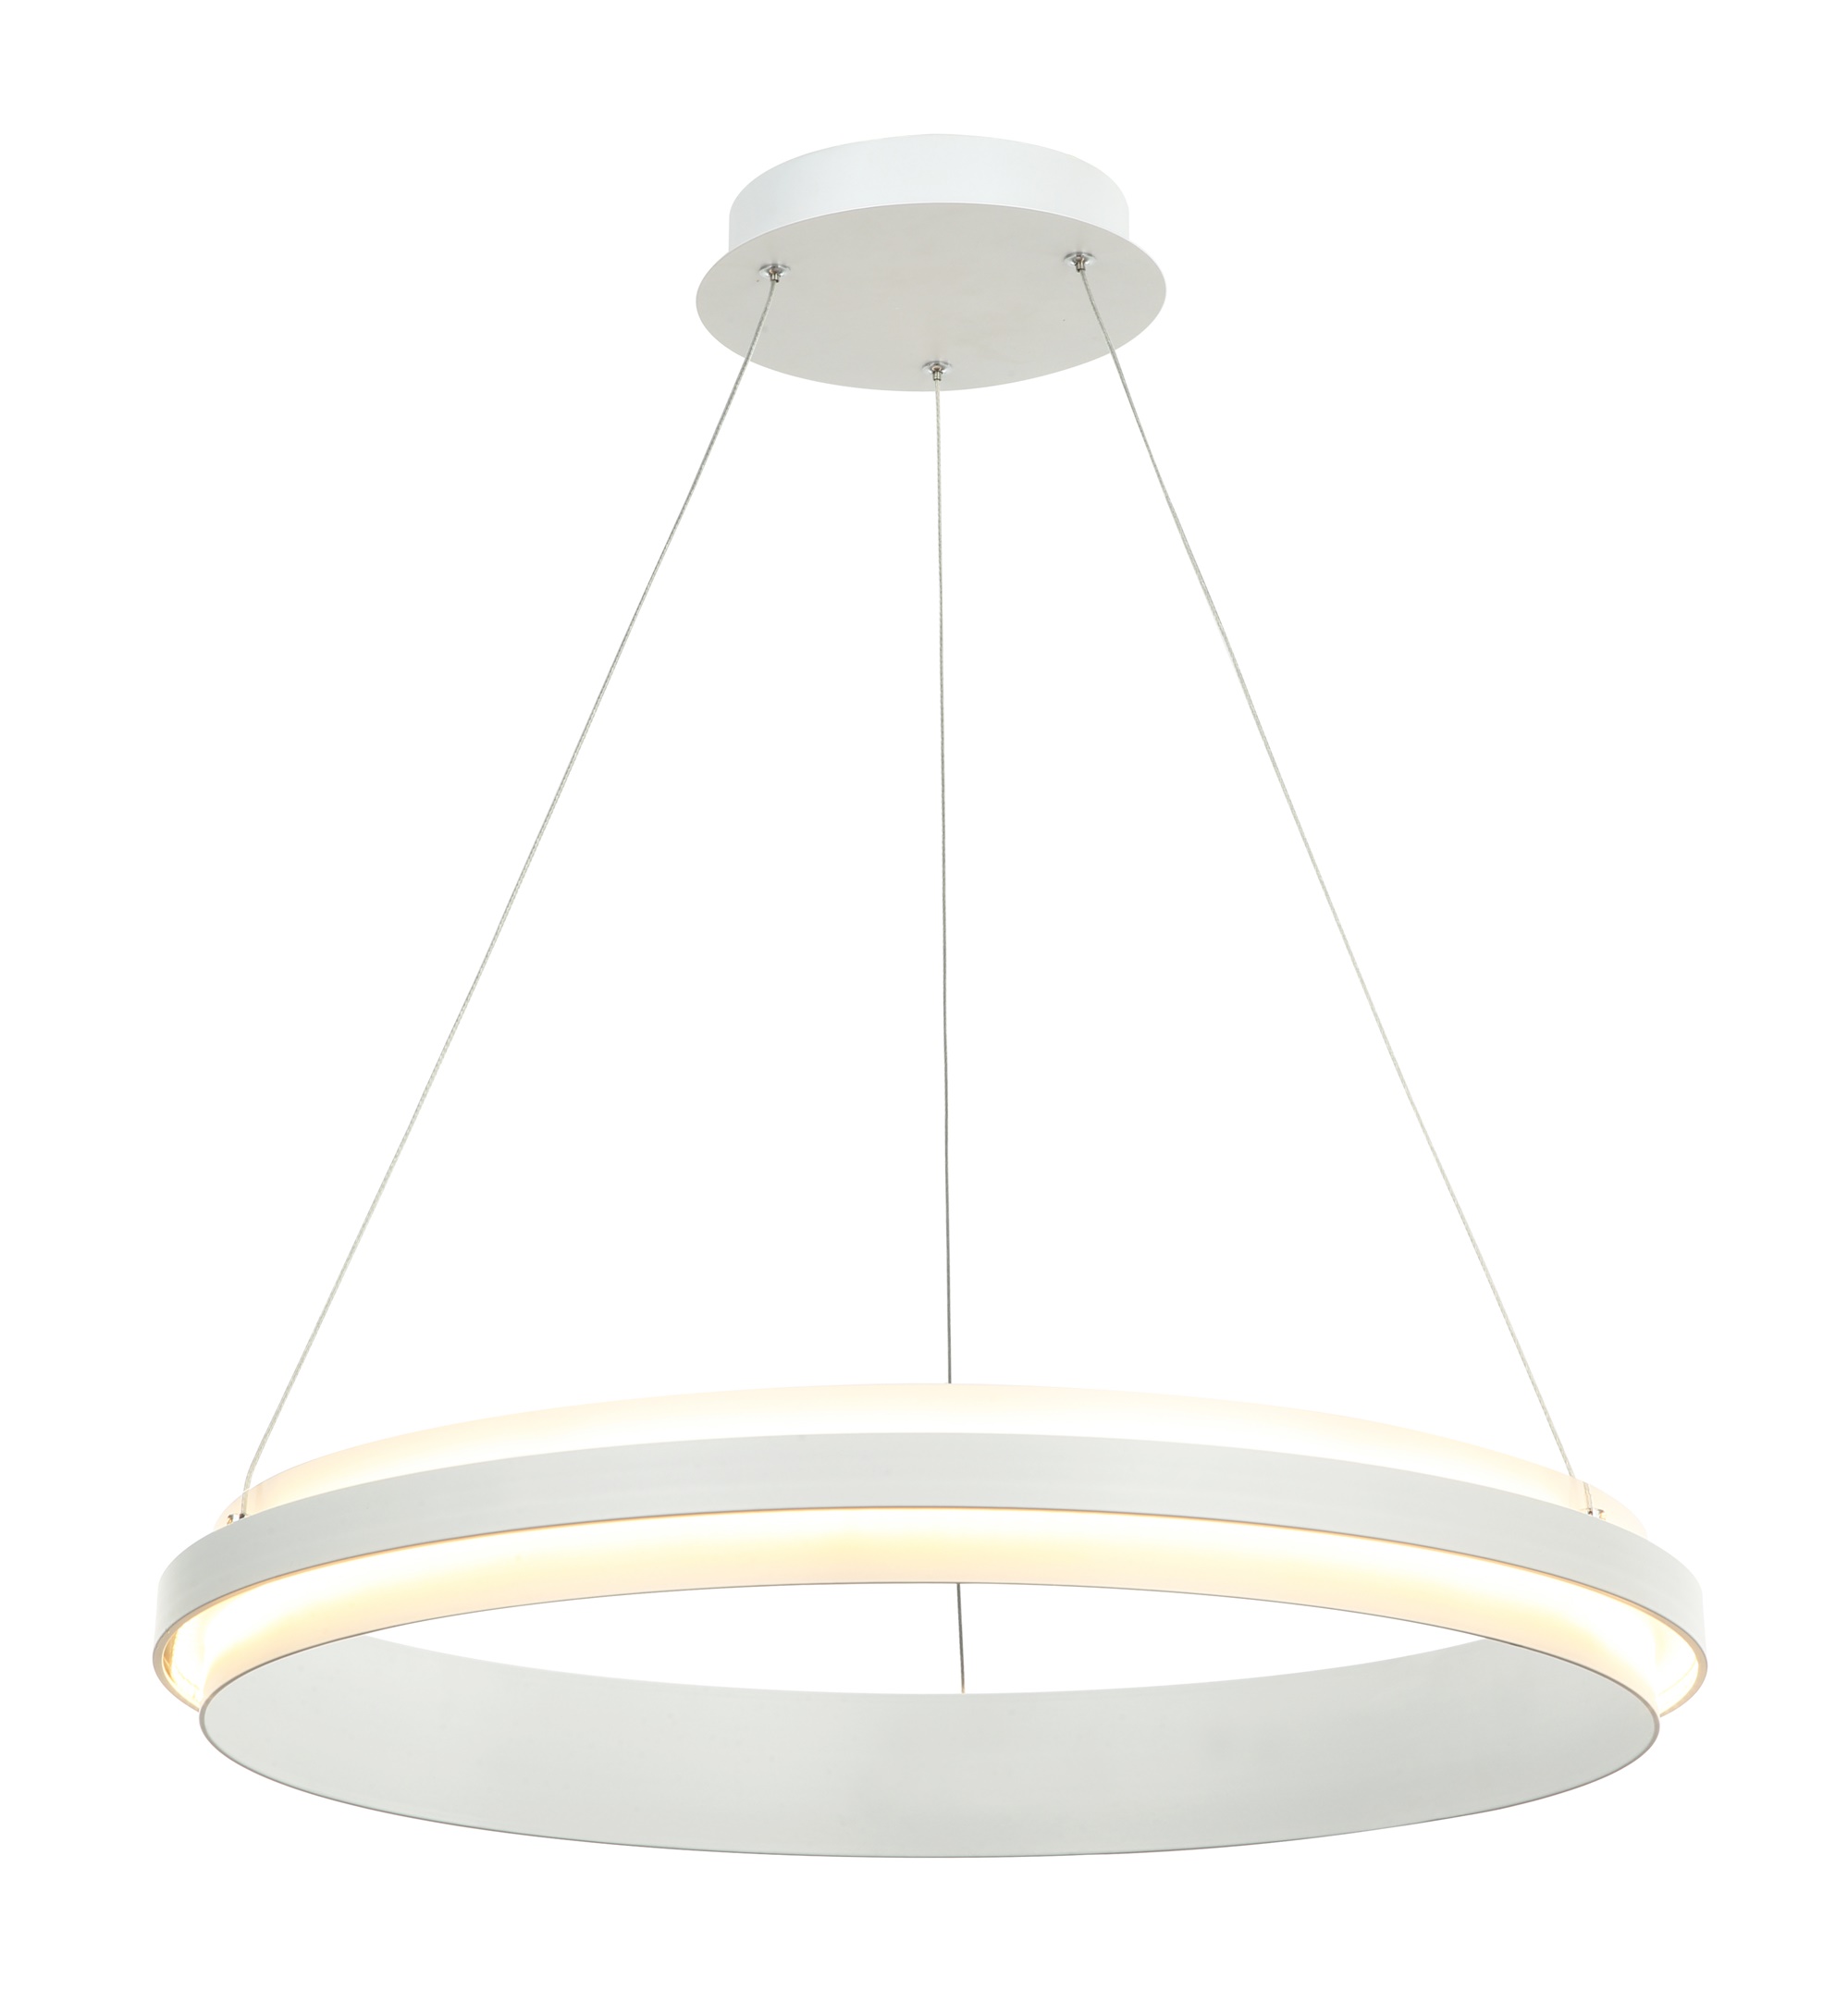 Saintly mordern pendant ceiling lights supply for kitchen island-1